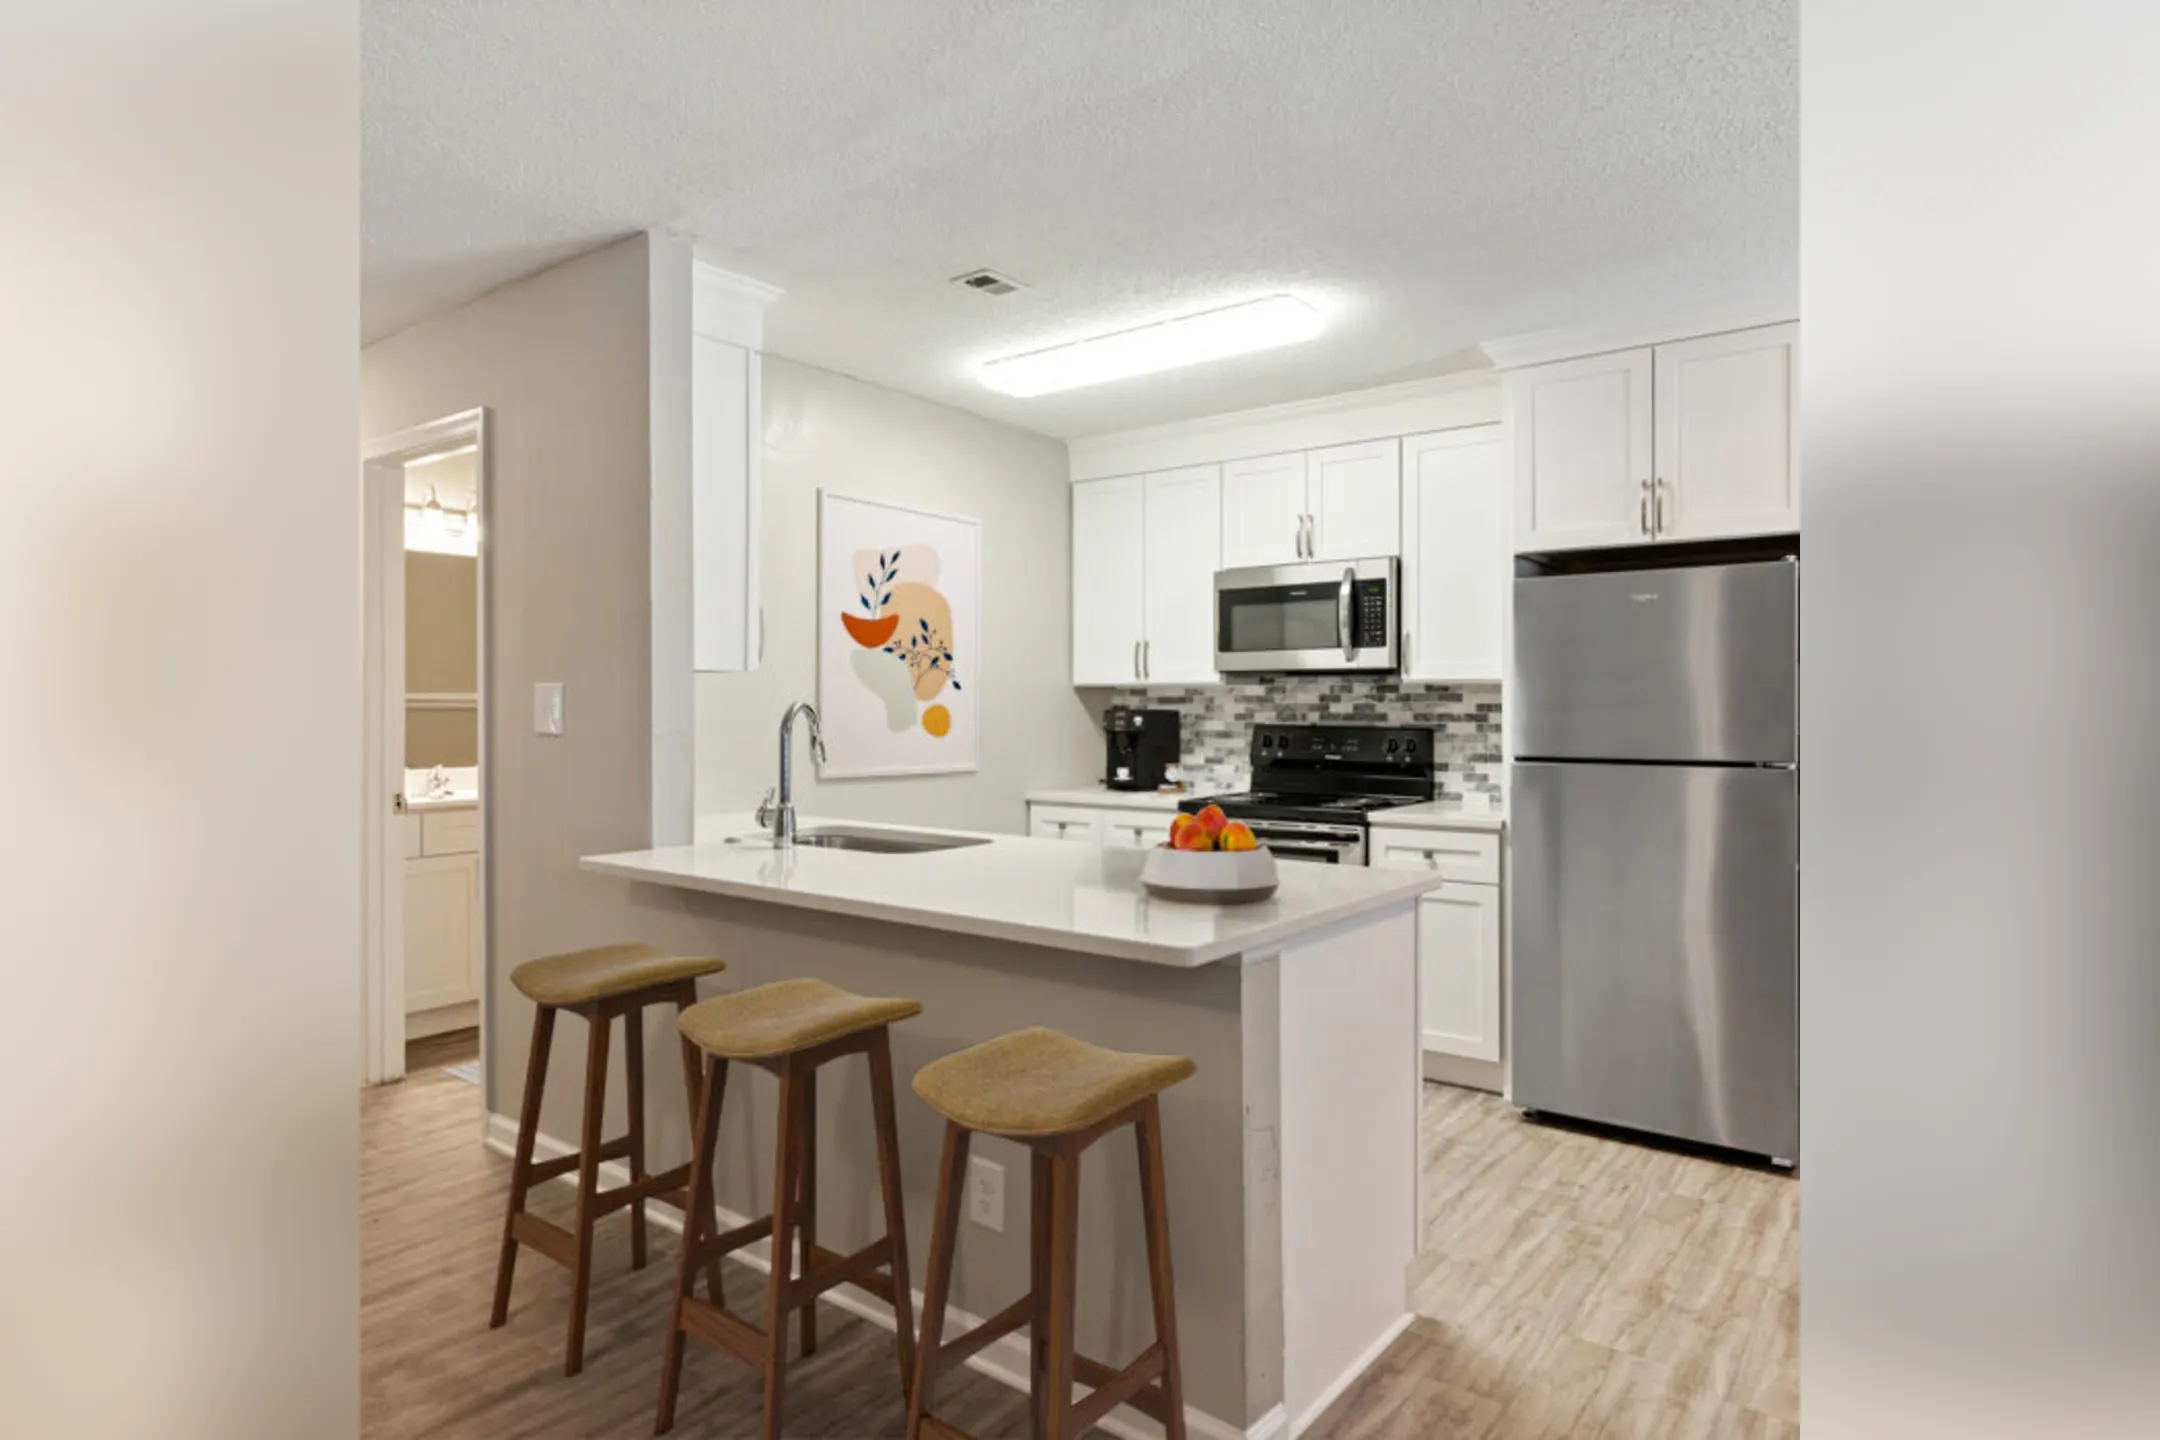 Kitchen - Country Club Apartments - Mooresville, NC